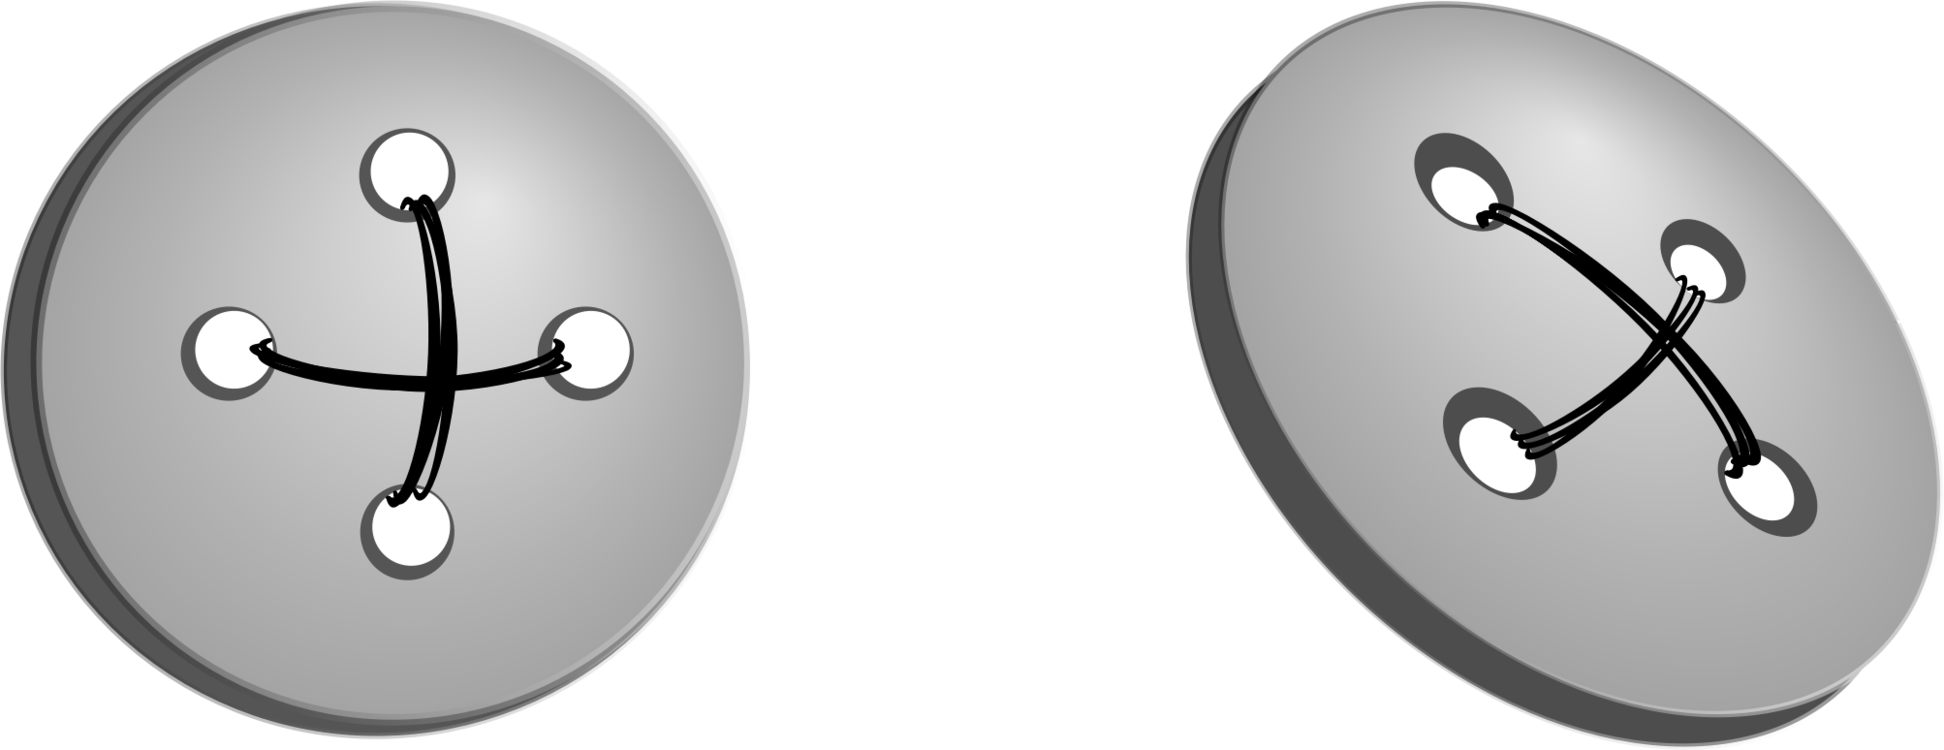 Technology,Black And White,Button